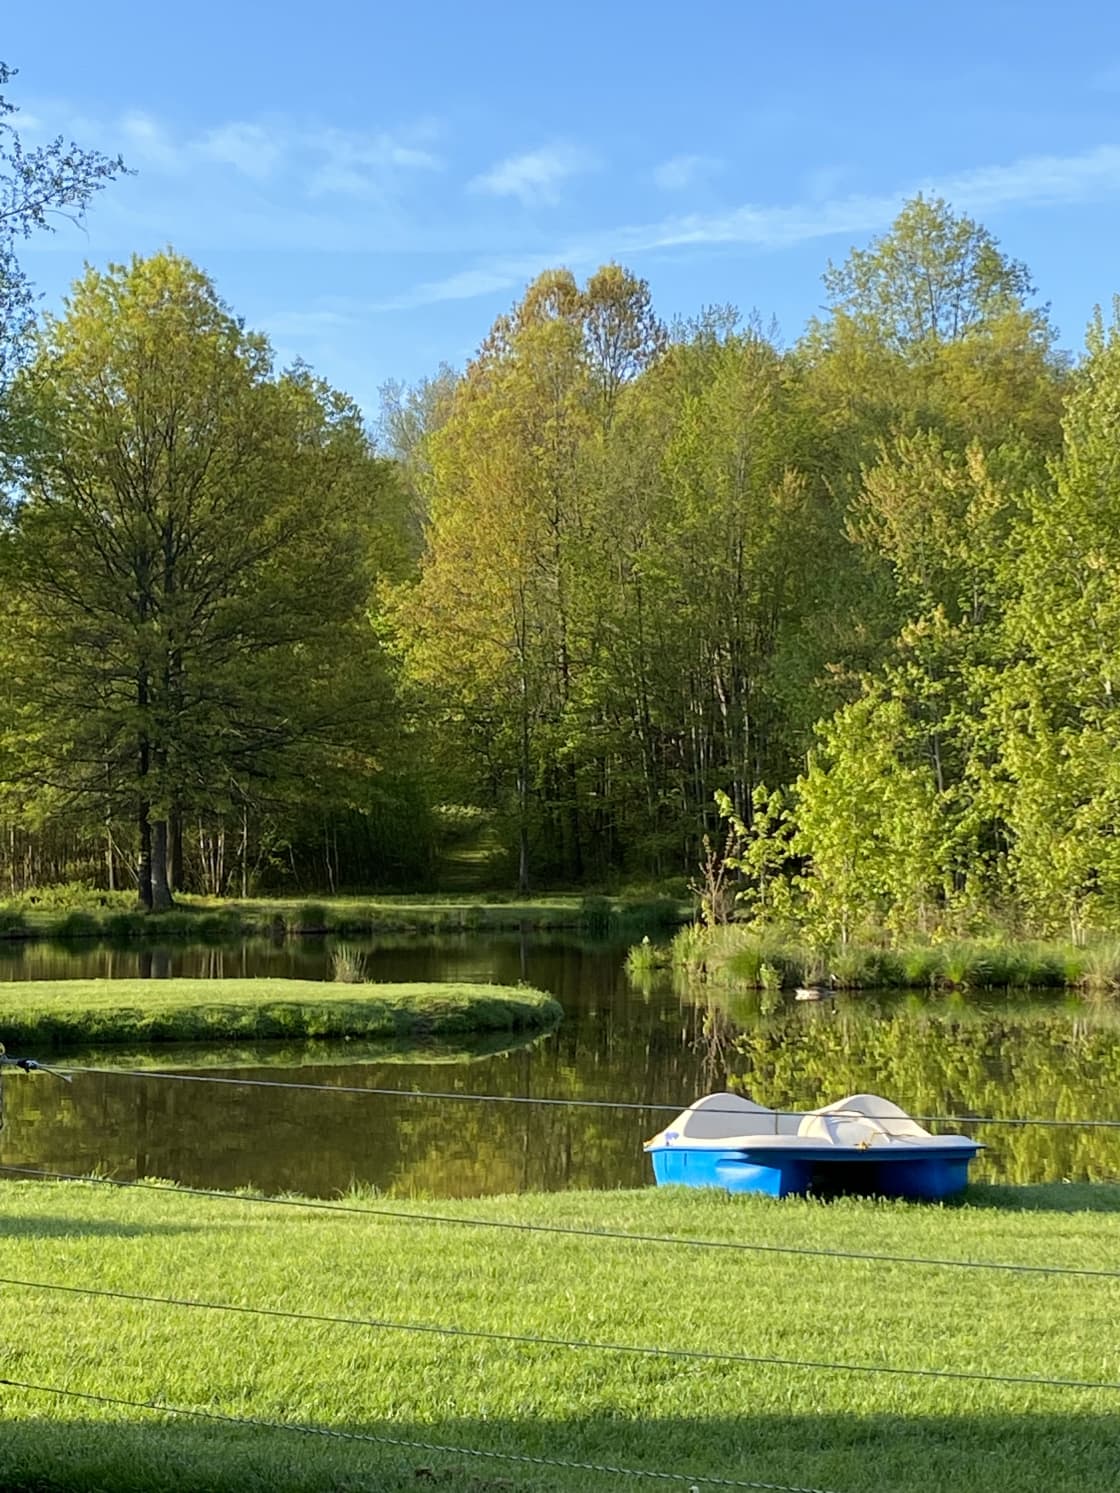 Paddle Boat and the view of your campsite easy does it "ENJOY"